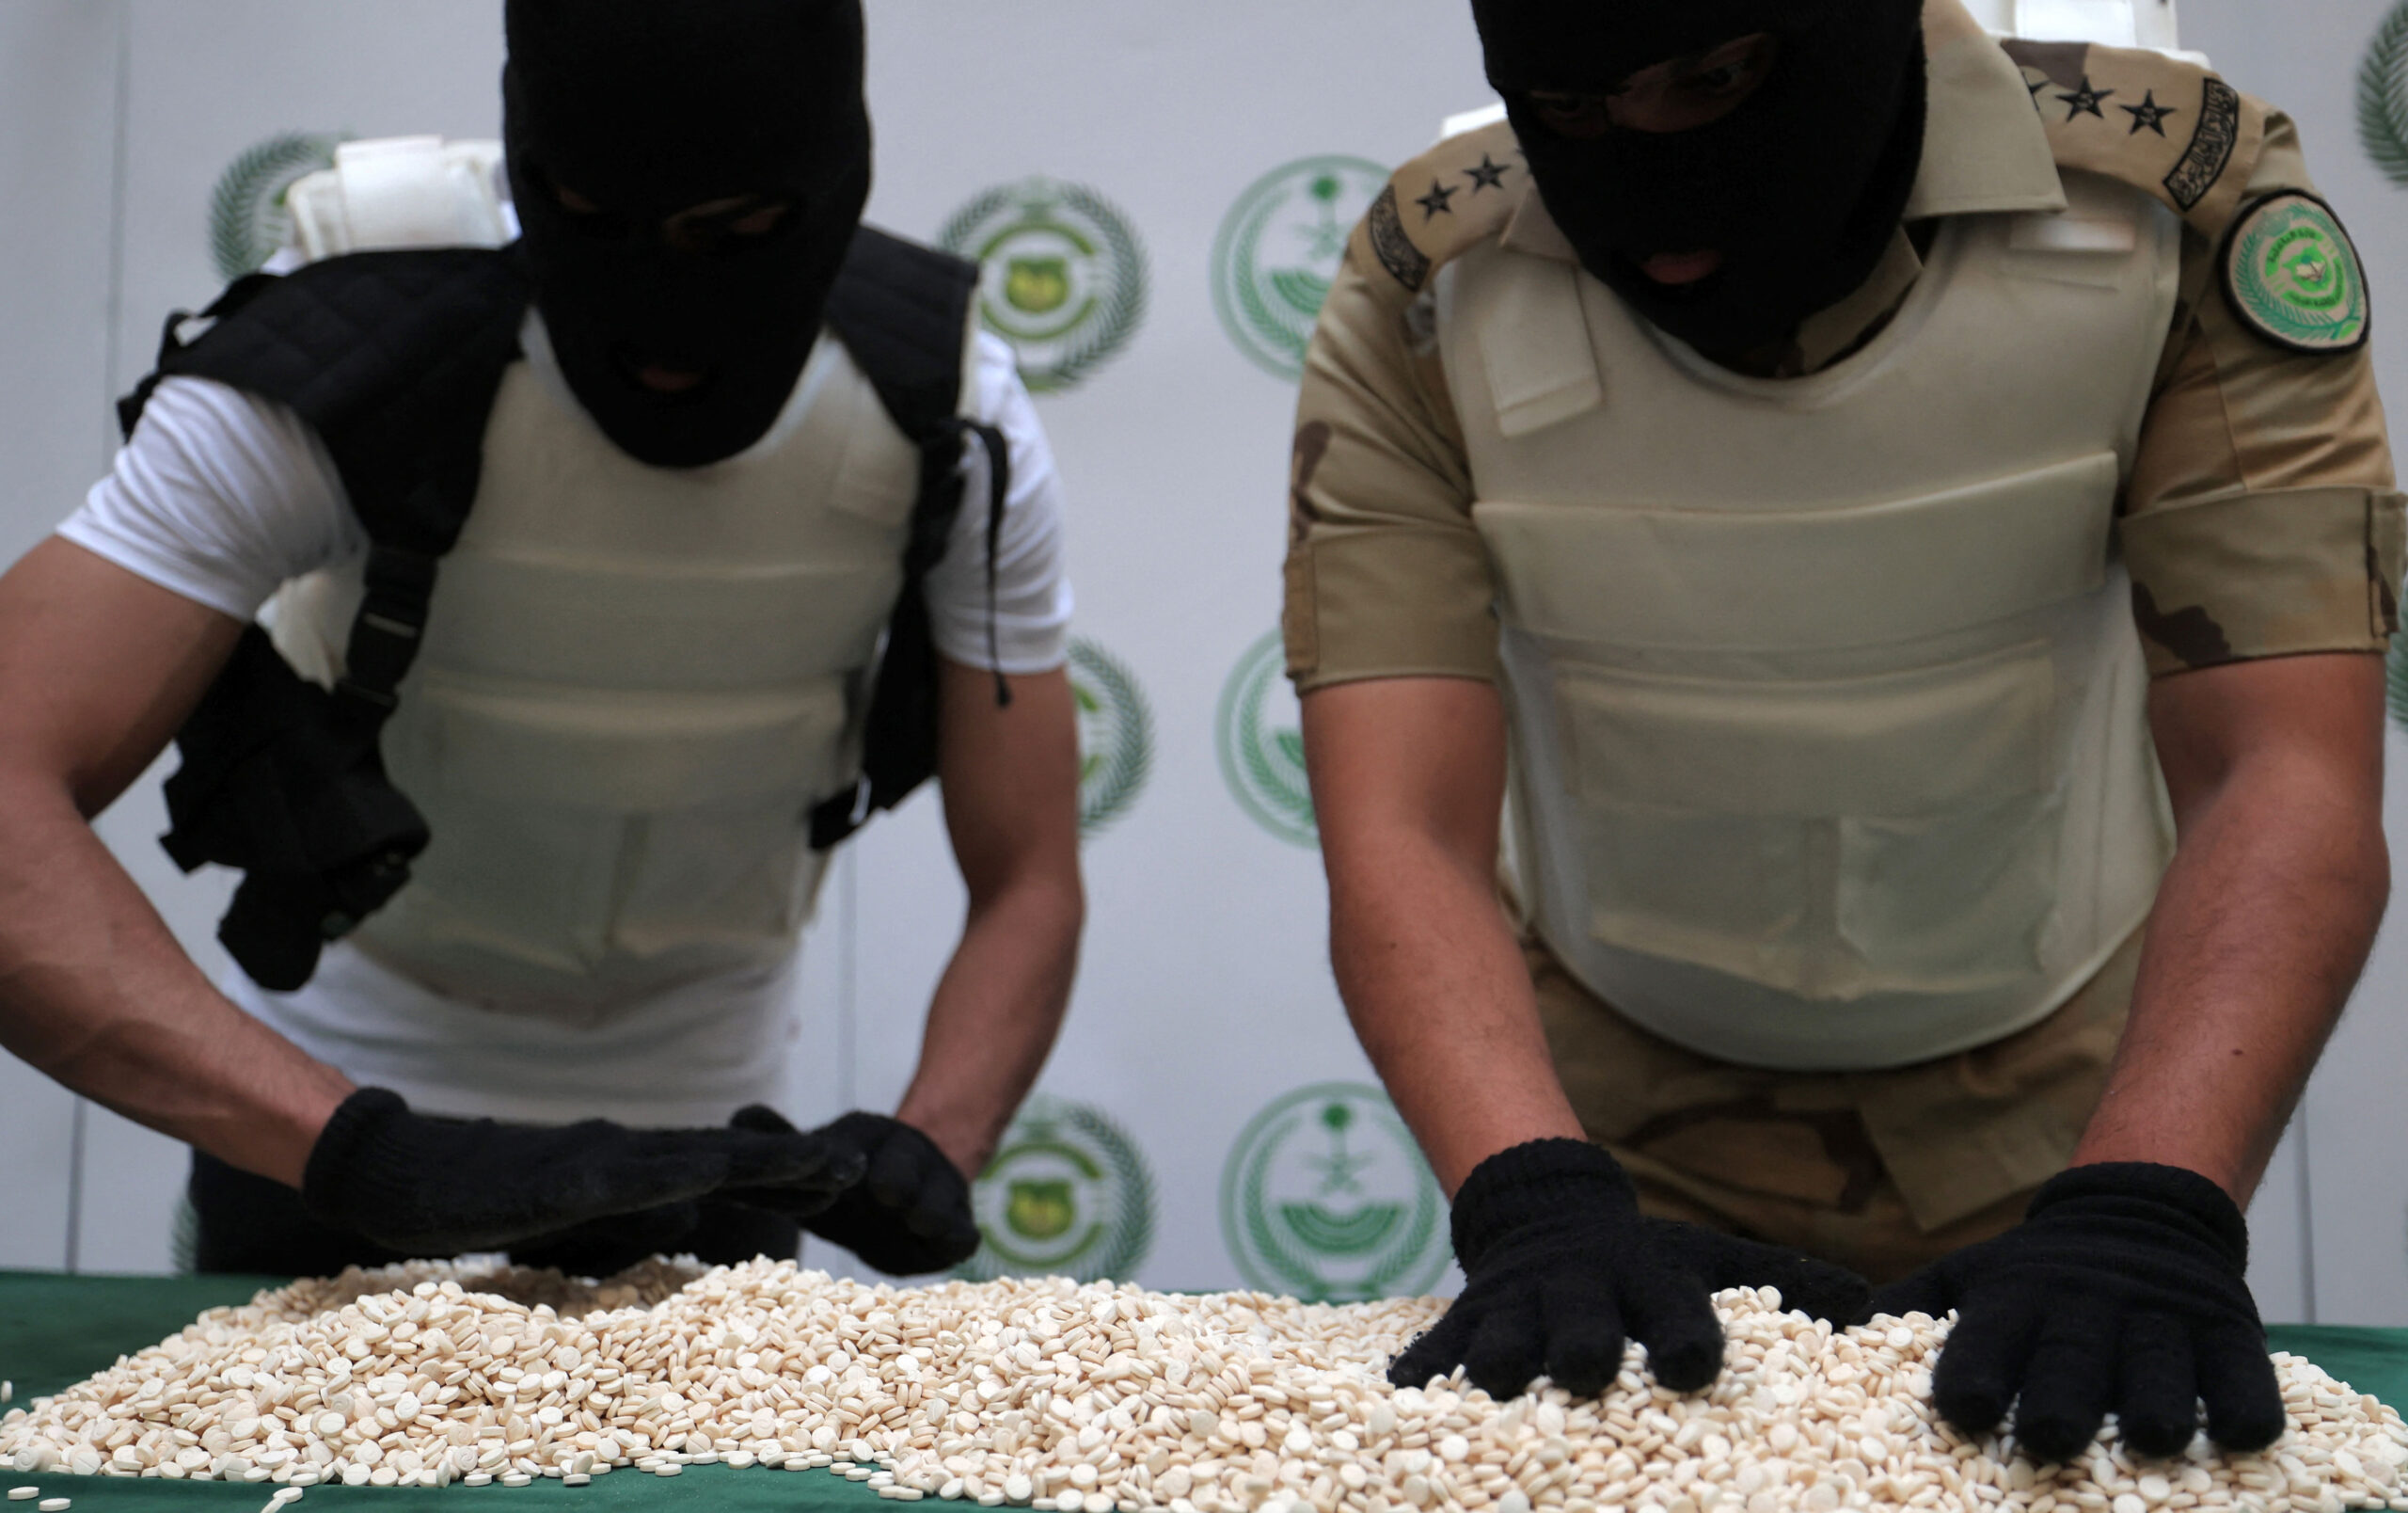 Captive to Captagon: How a Narcotic Has Become Scourge of Middle East